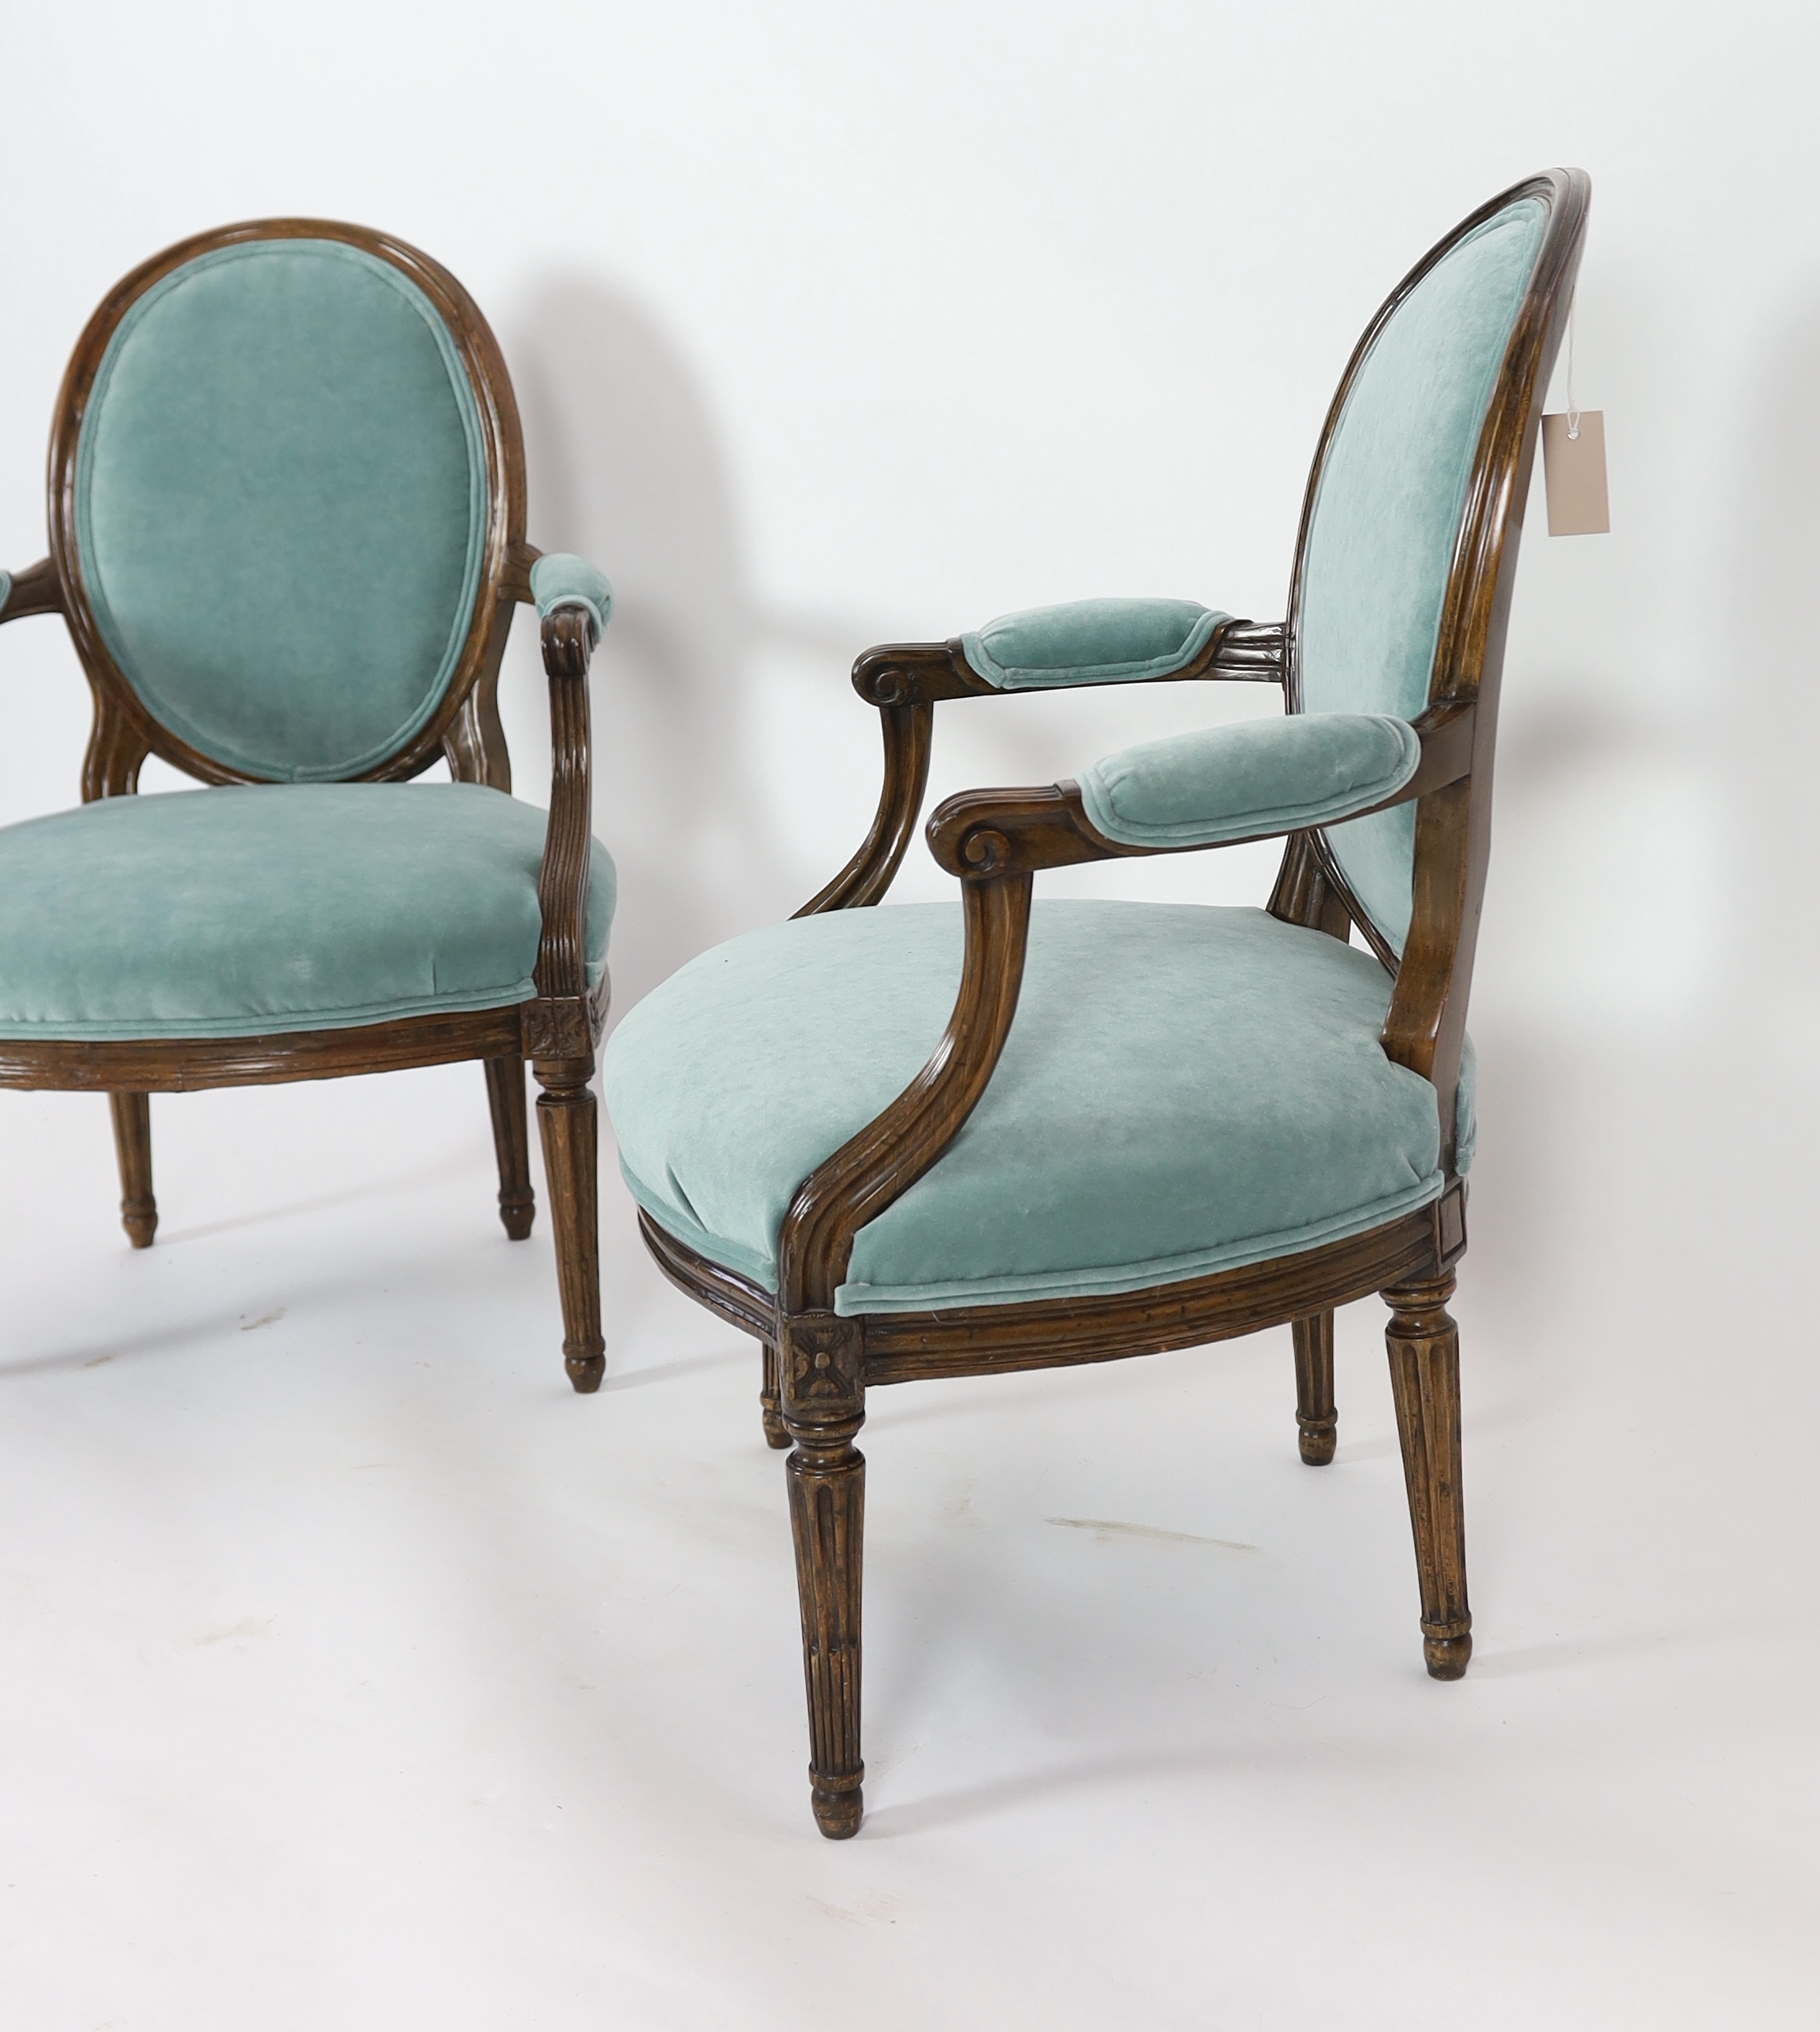 Churchill, Winston S. (1874-1965) - From Sir Winston’s London home at 28, Hyde Park Gate - Two similar Louis XVI provincial open armchairs